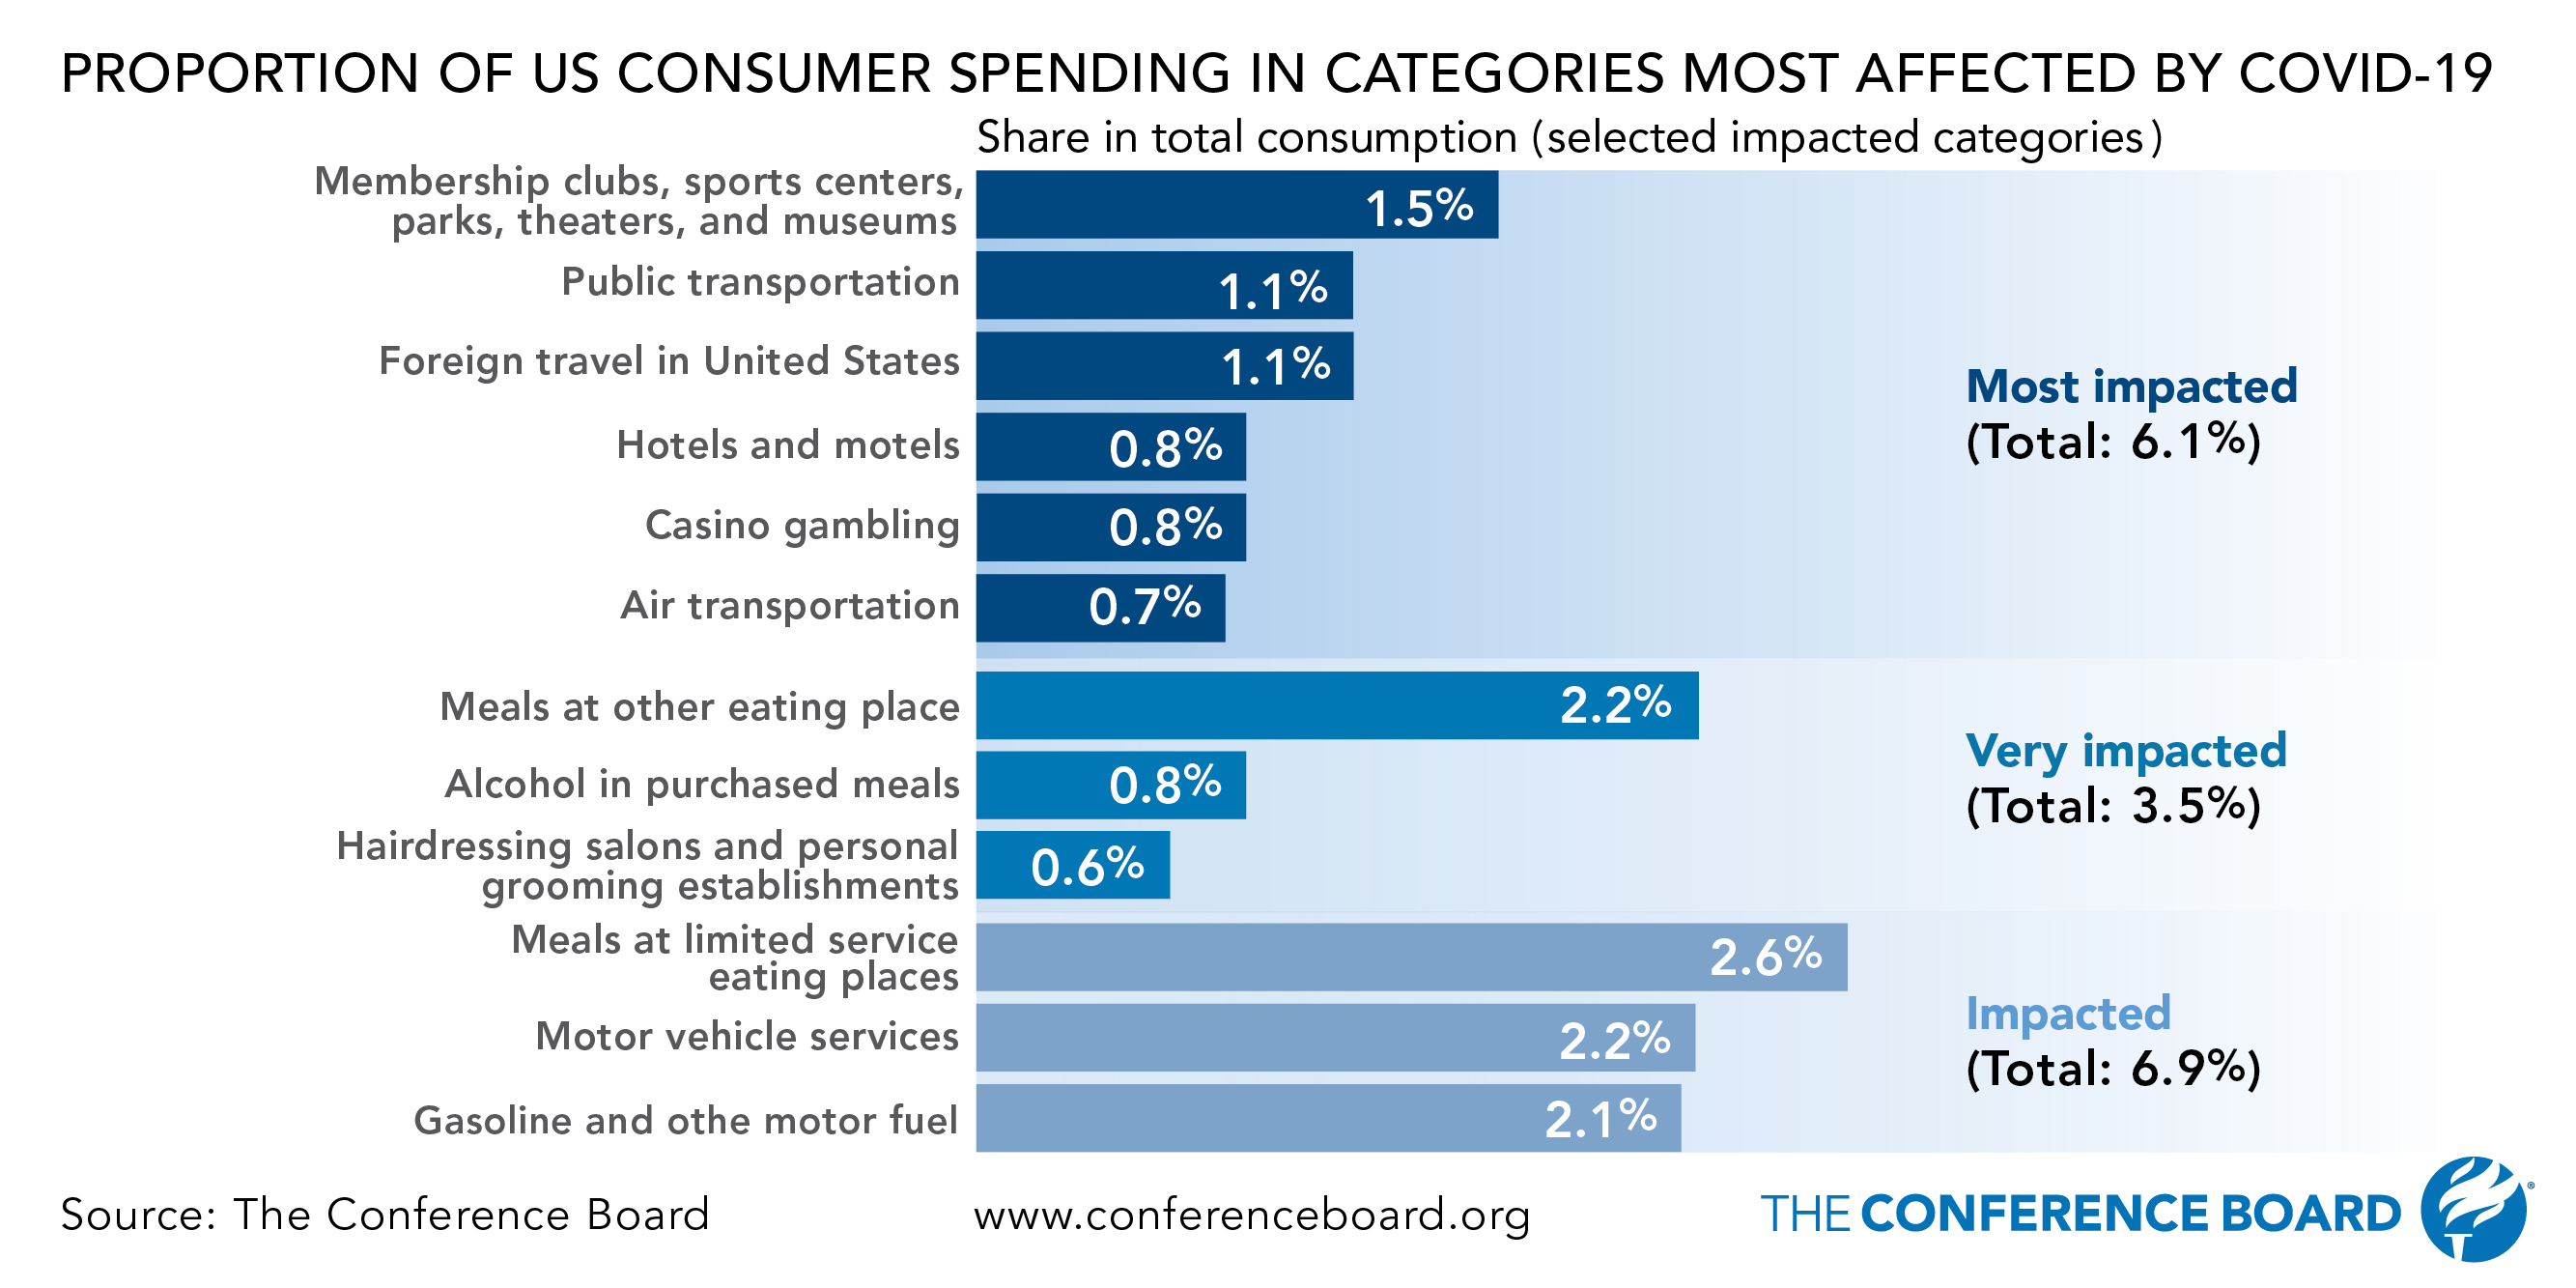 For every 10% drop in spending in categories affected by COVID-19, overall consumer spending drops 1.7%